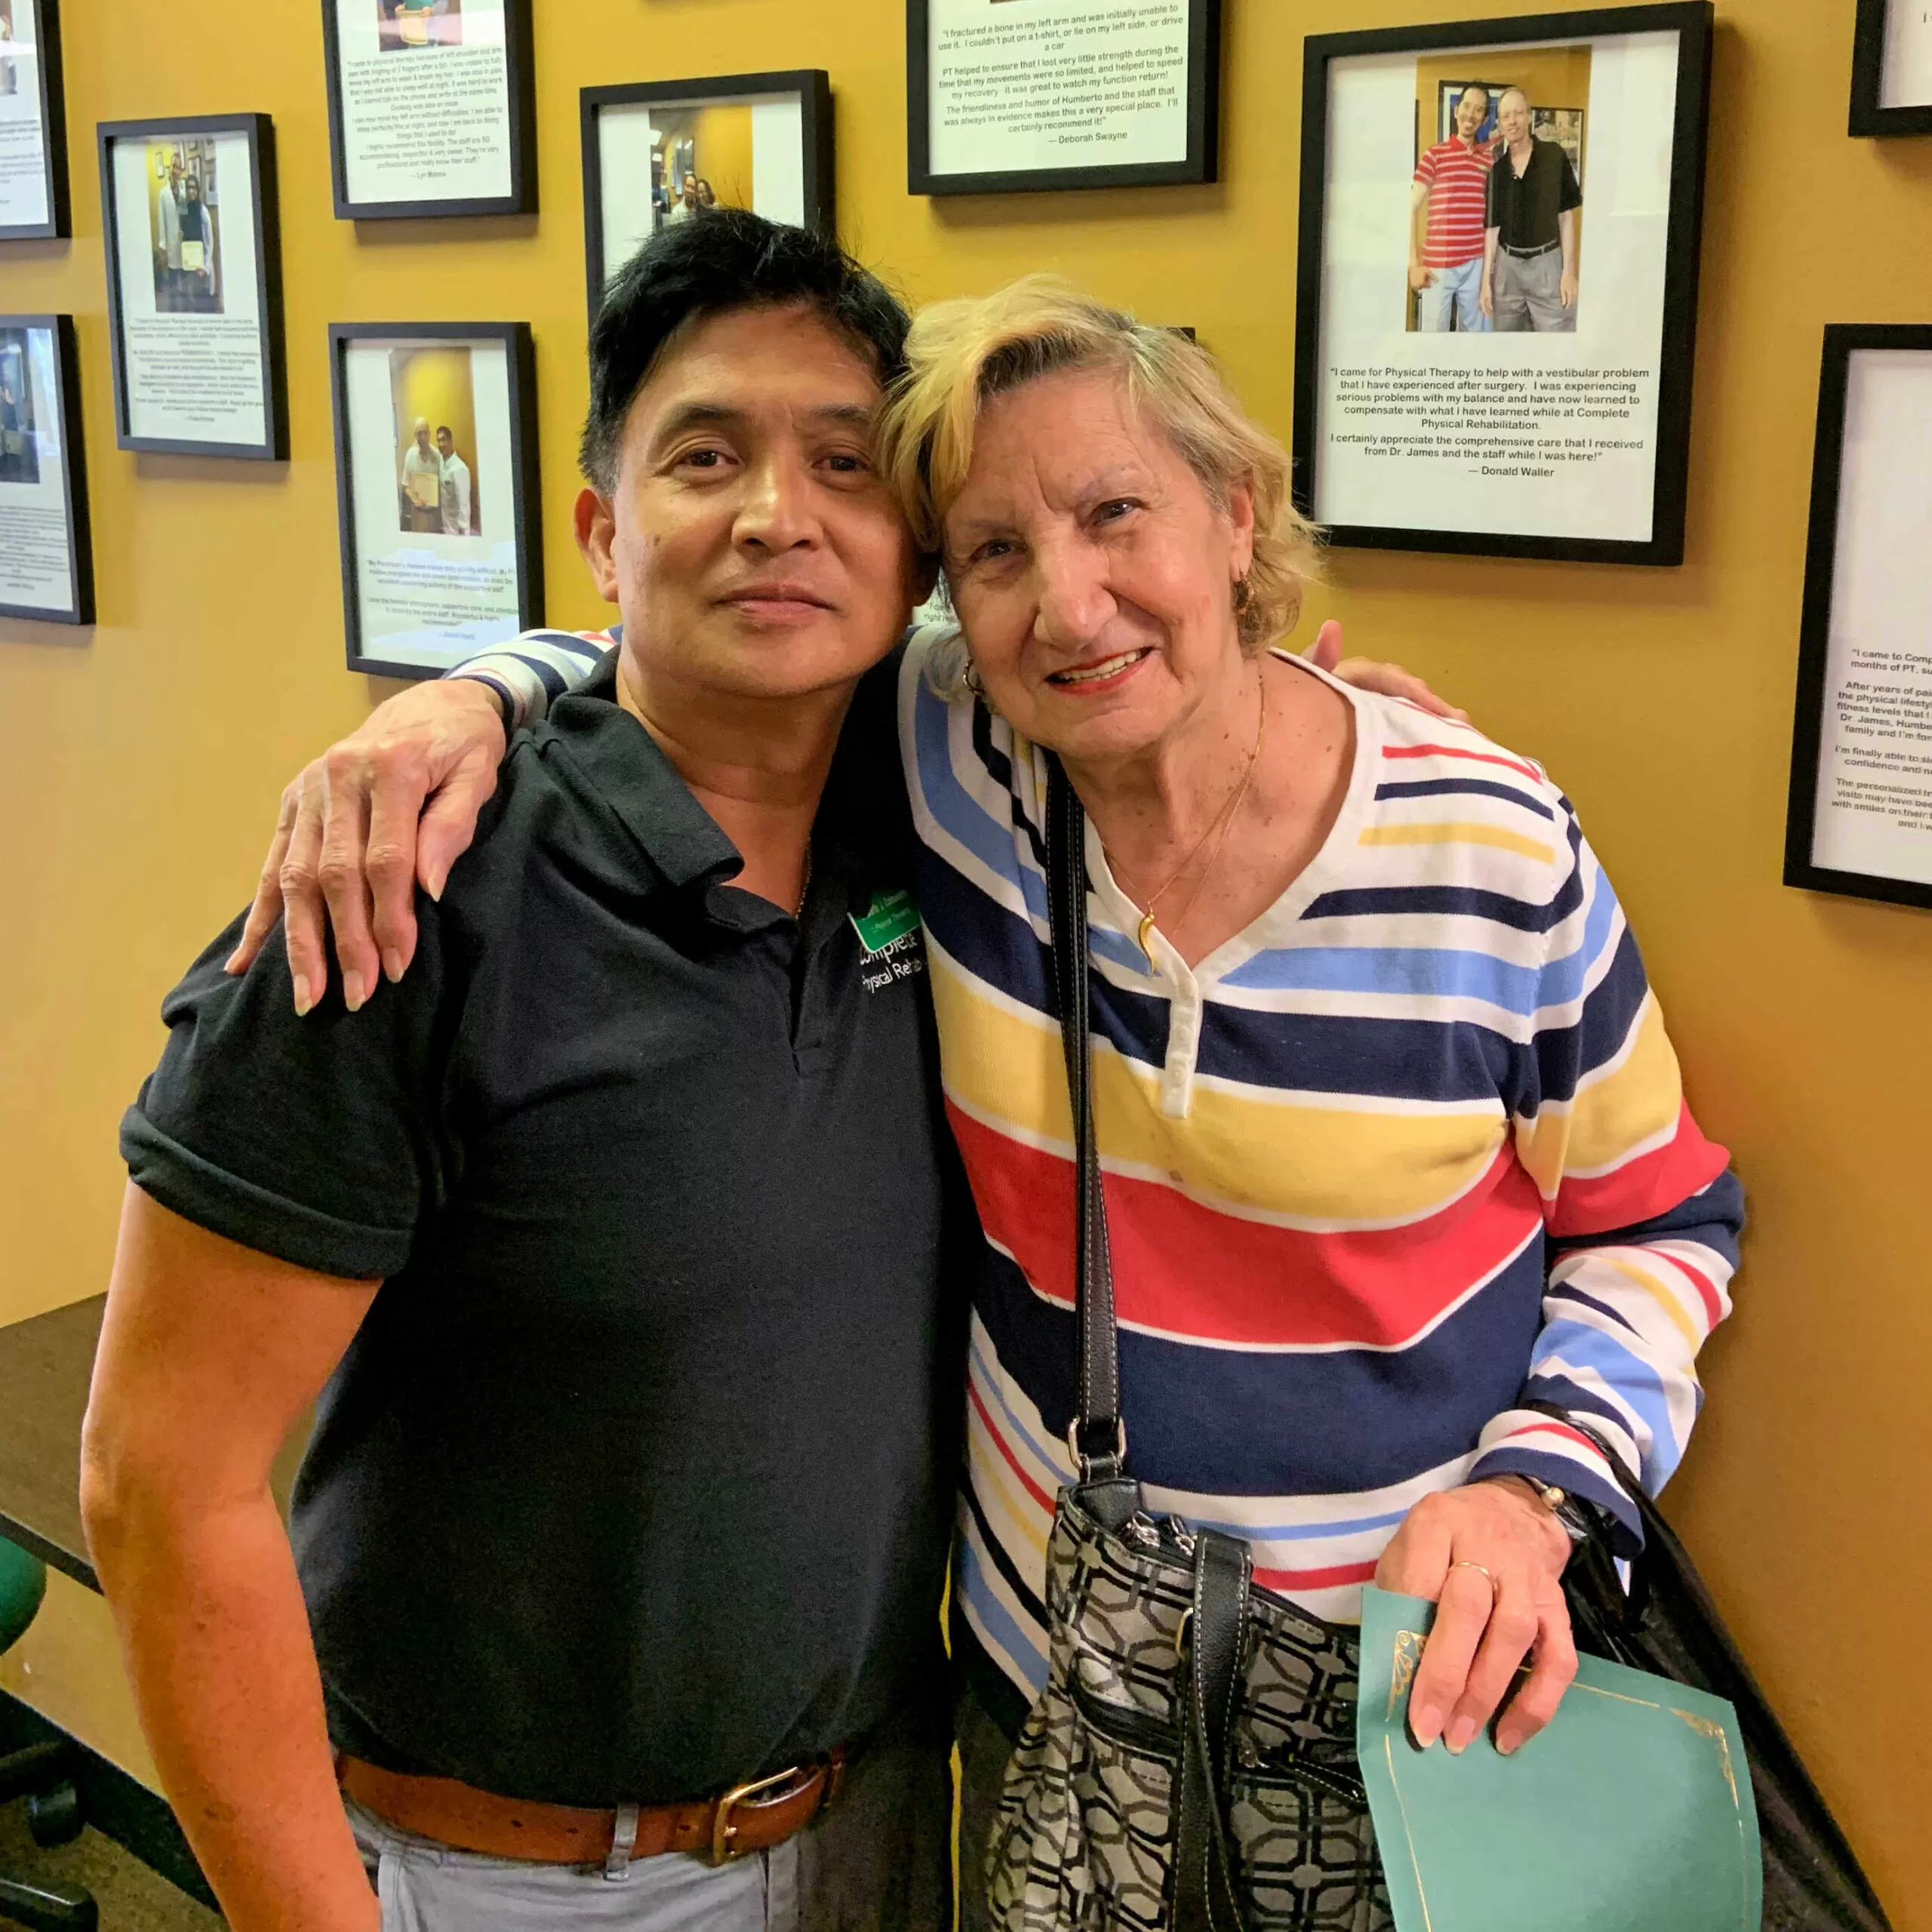 jersey city physical therapist humberto colmenares with pain patient louisa